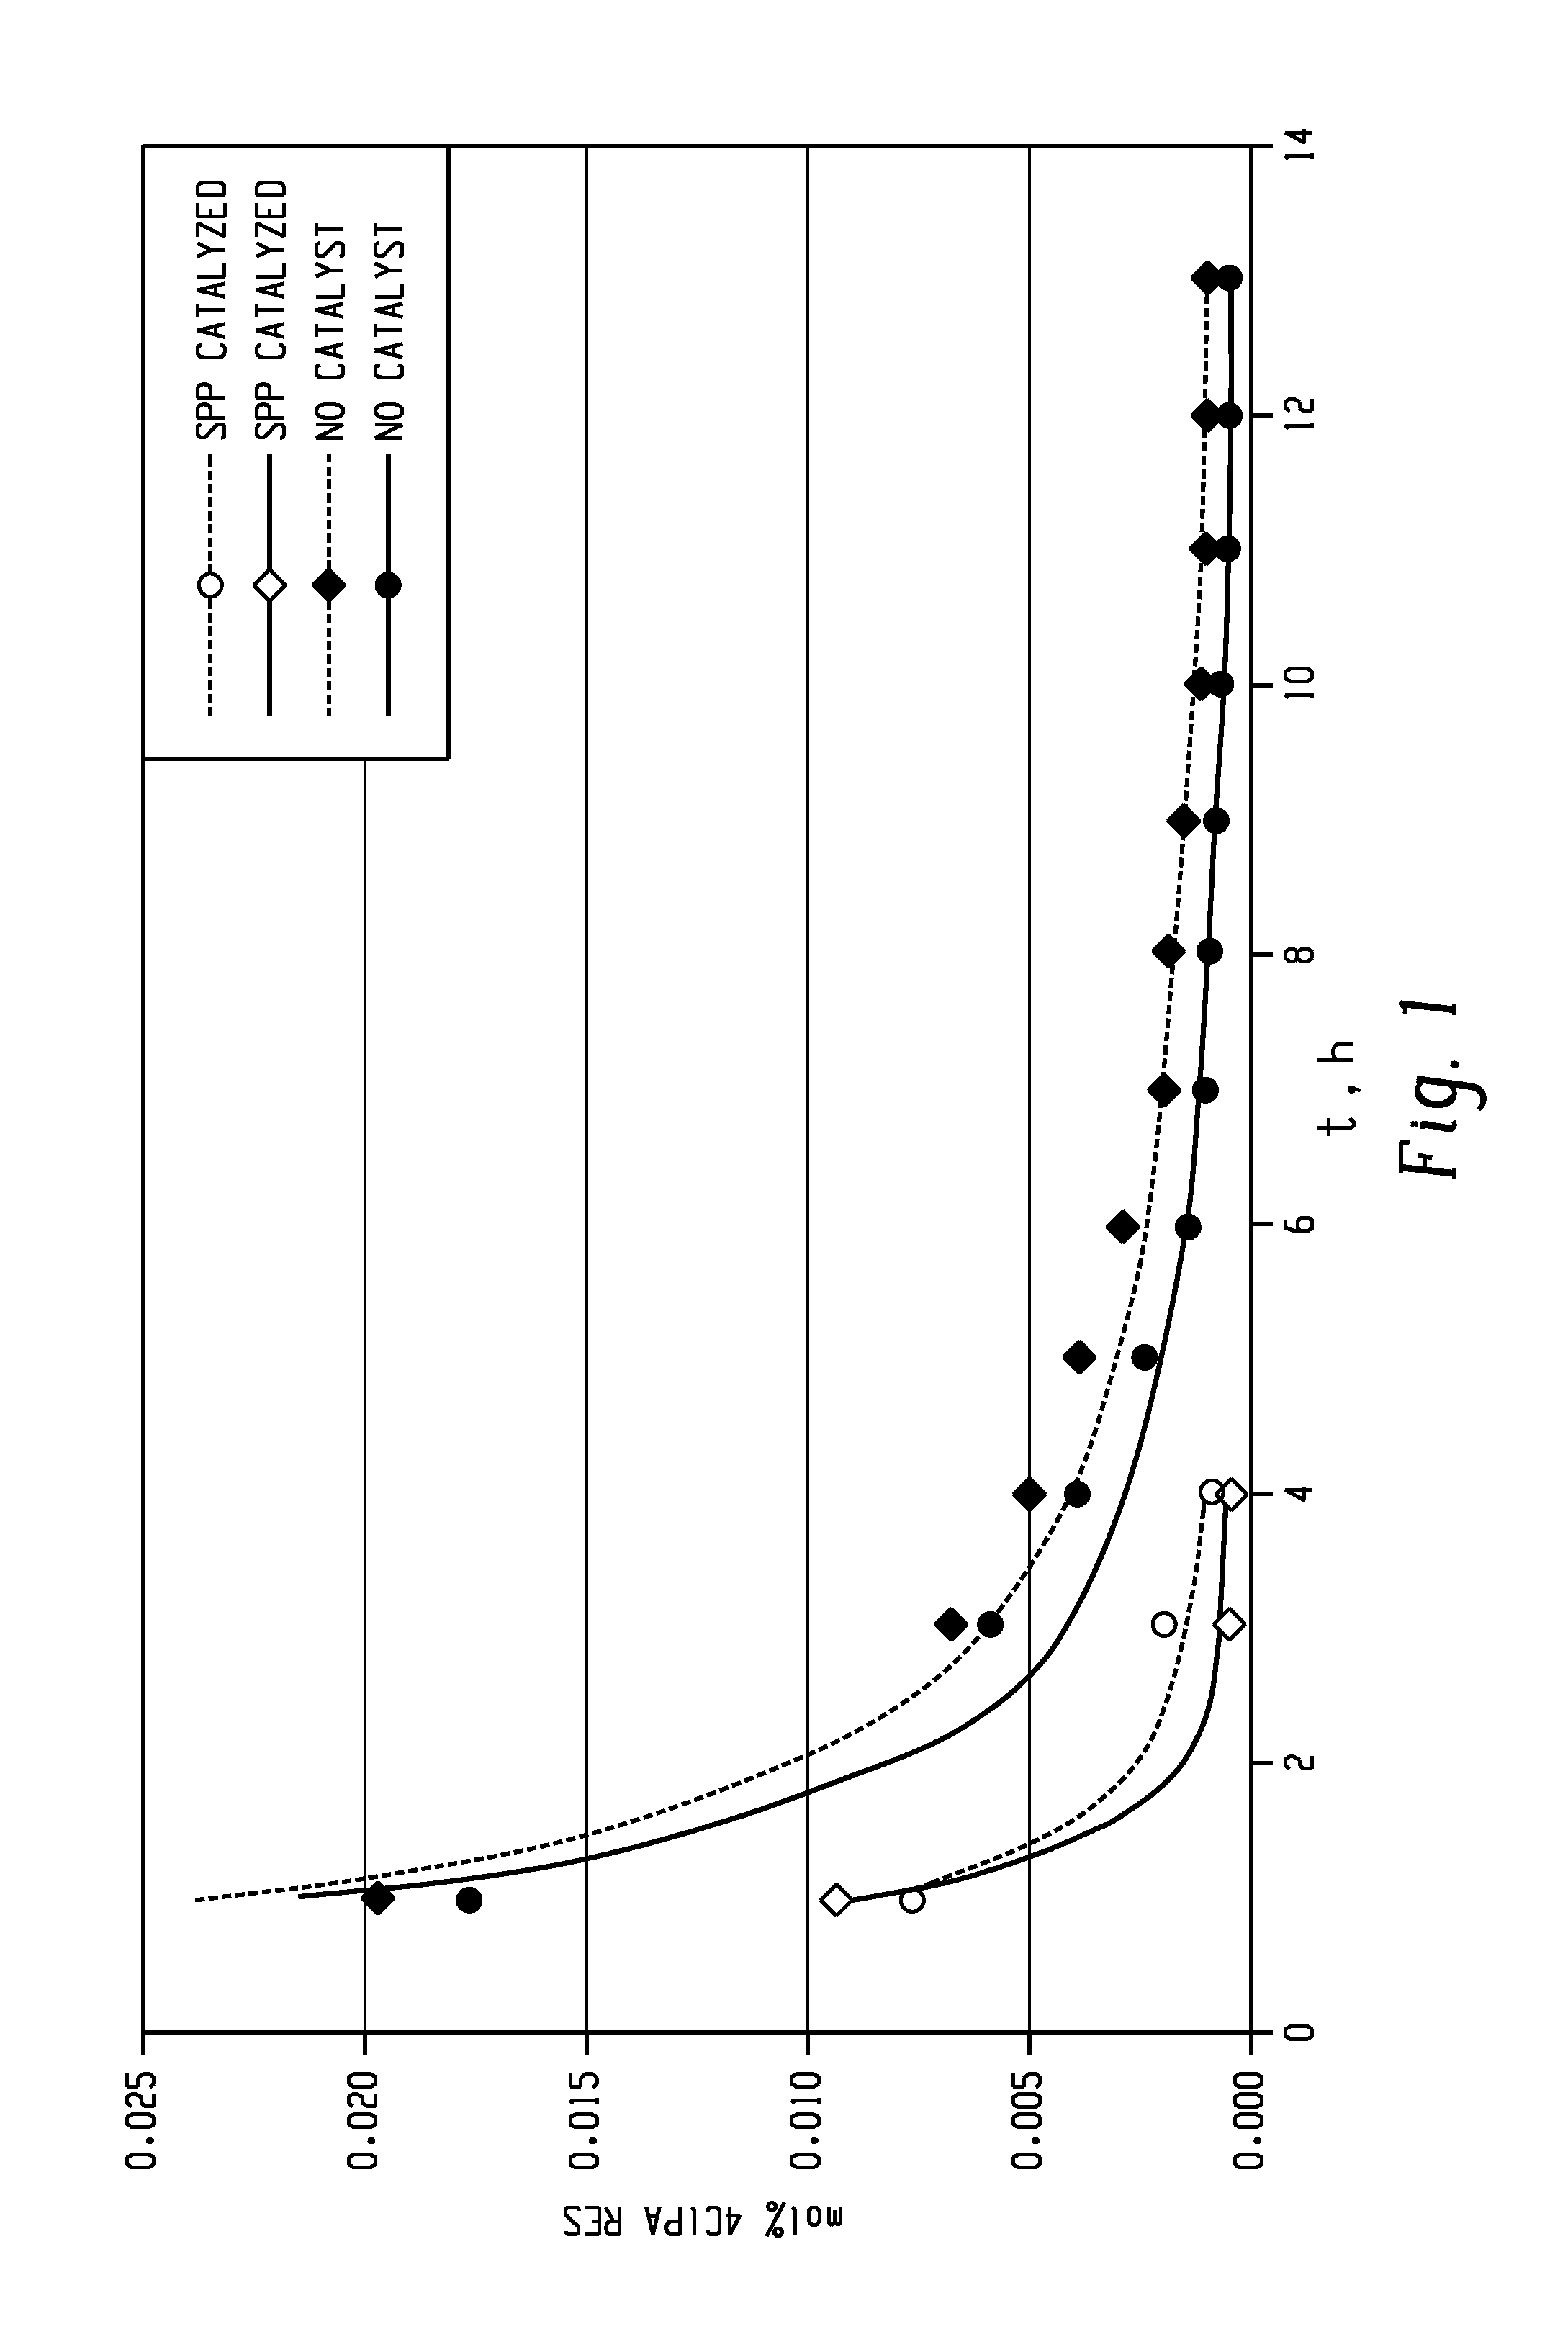 Methods of manufacture of bis(phthalimide)s and polyetherimides, and bis(phthalimide)s, and polyetherimides formed therefrom